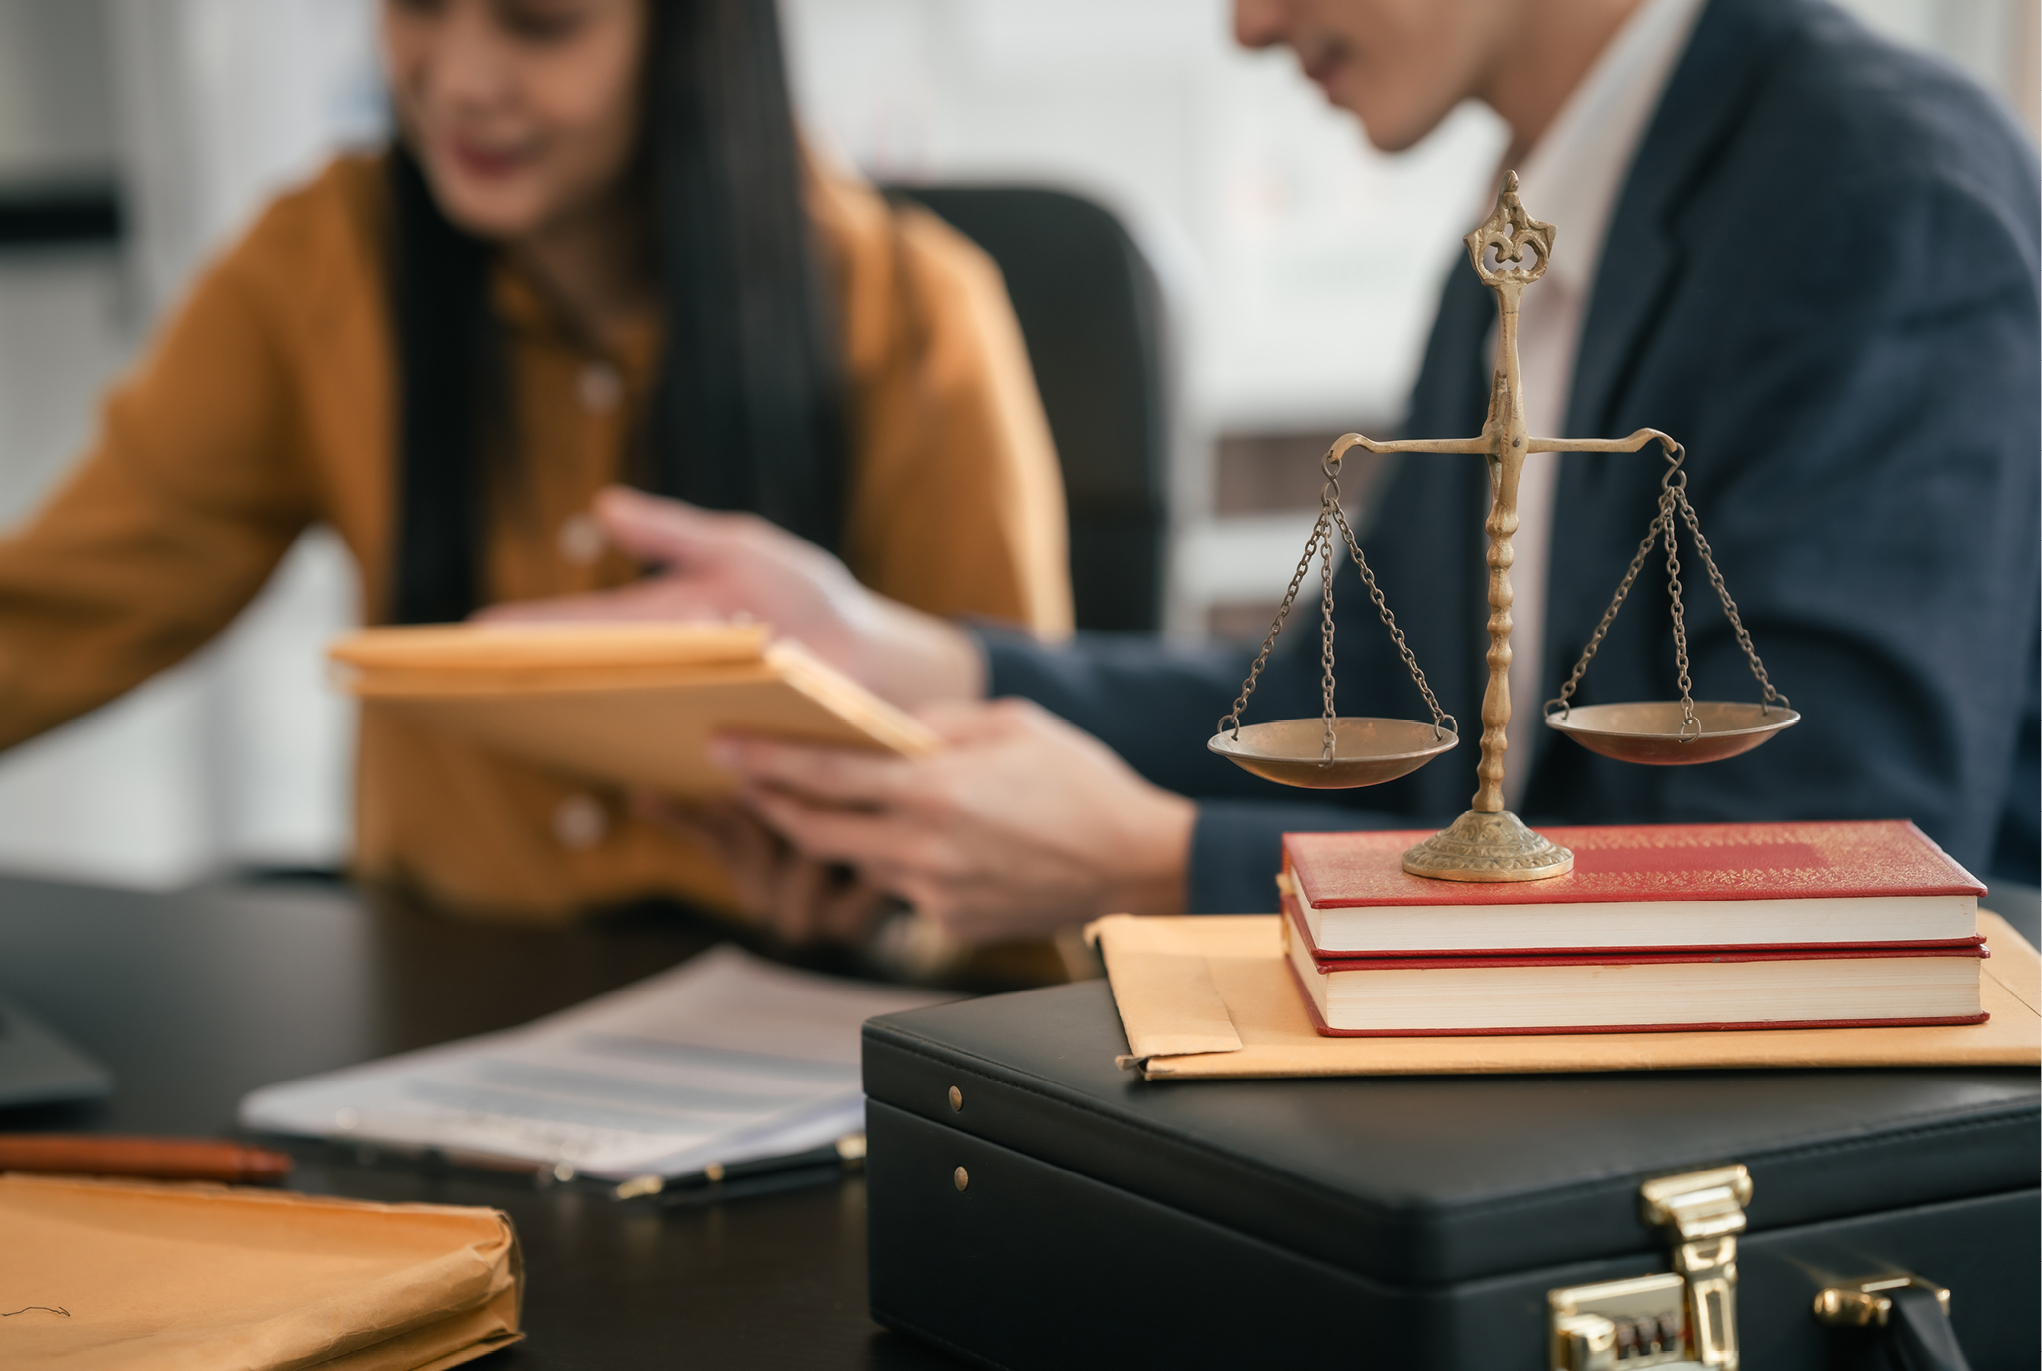 Two people sitting at a desk with a stack of books and the scales of justice